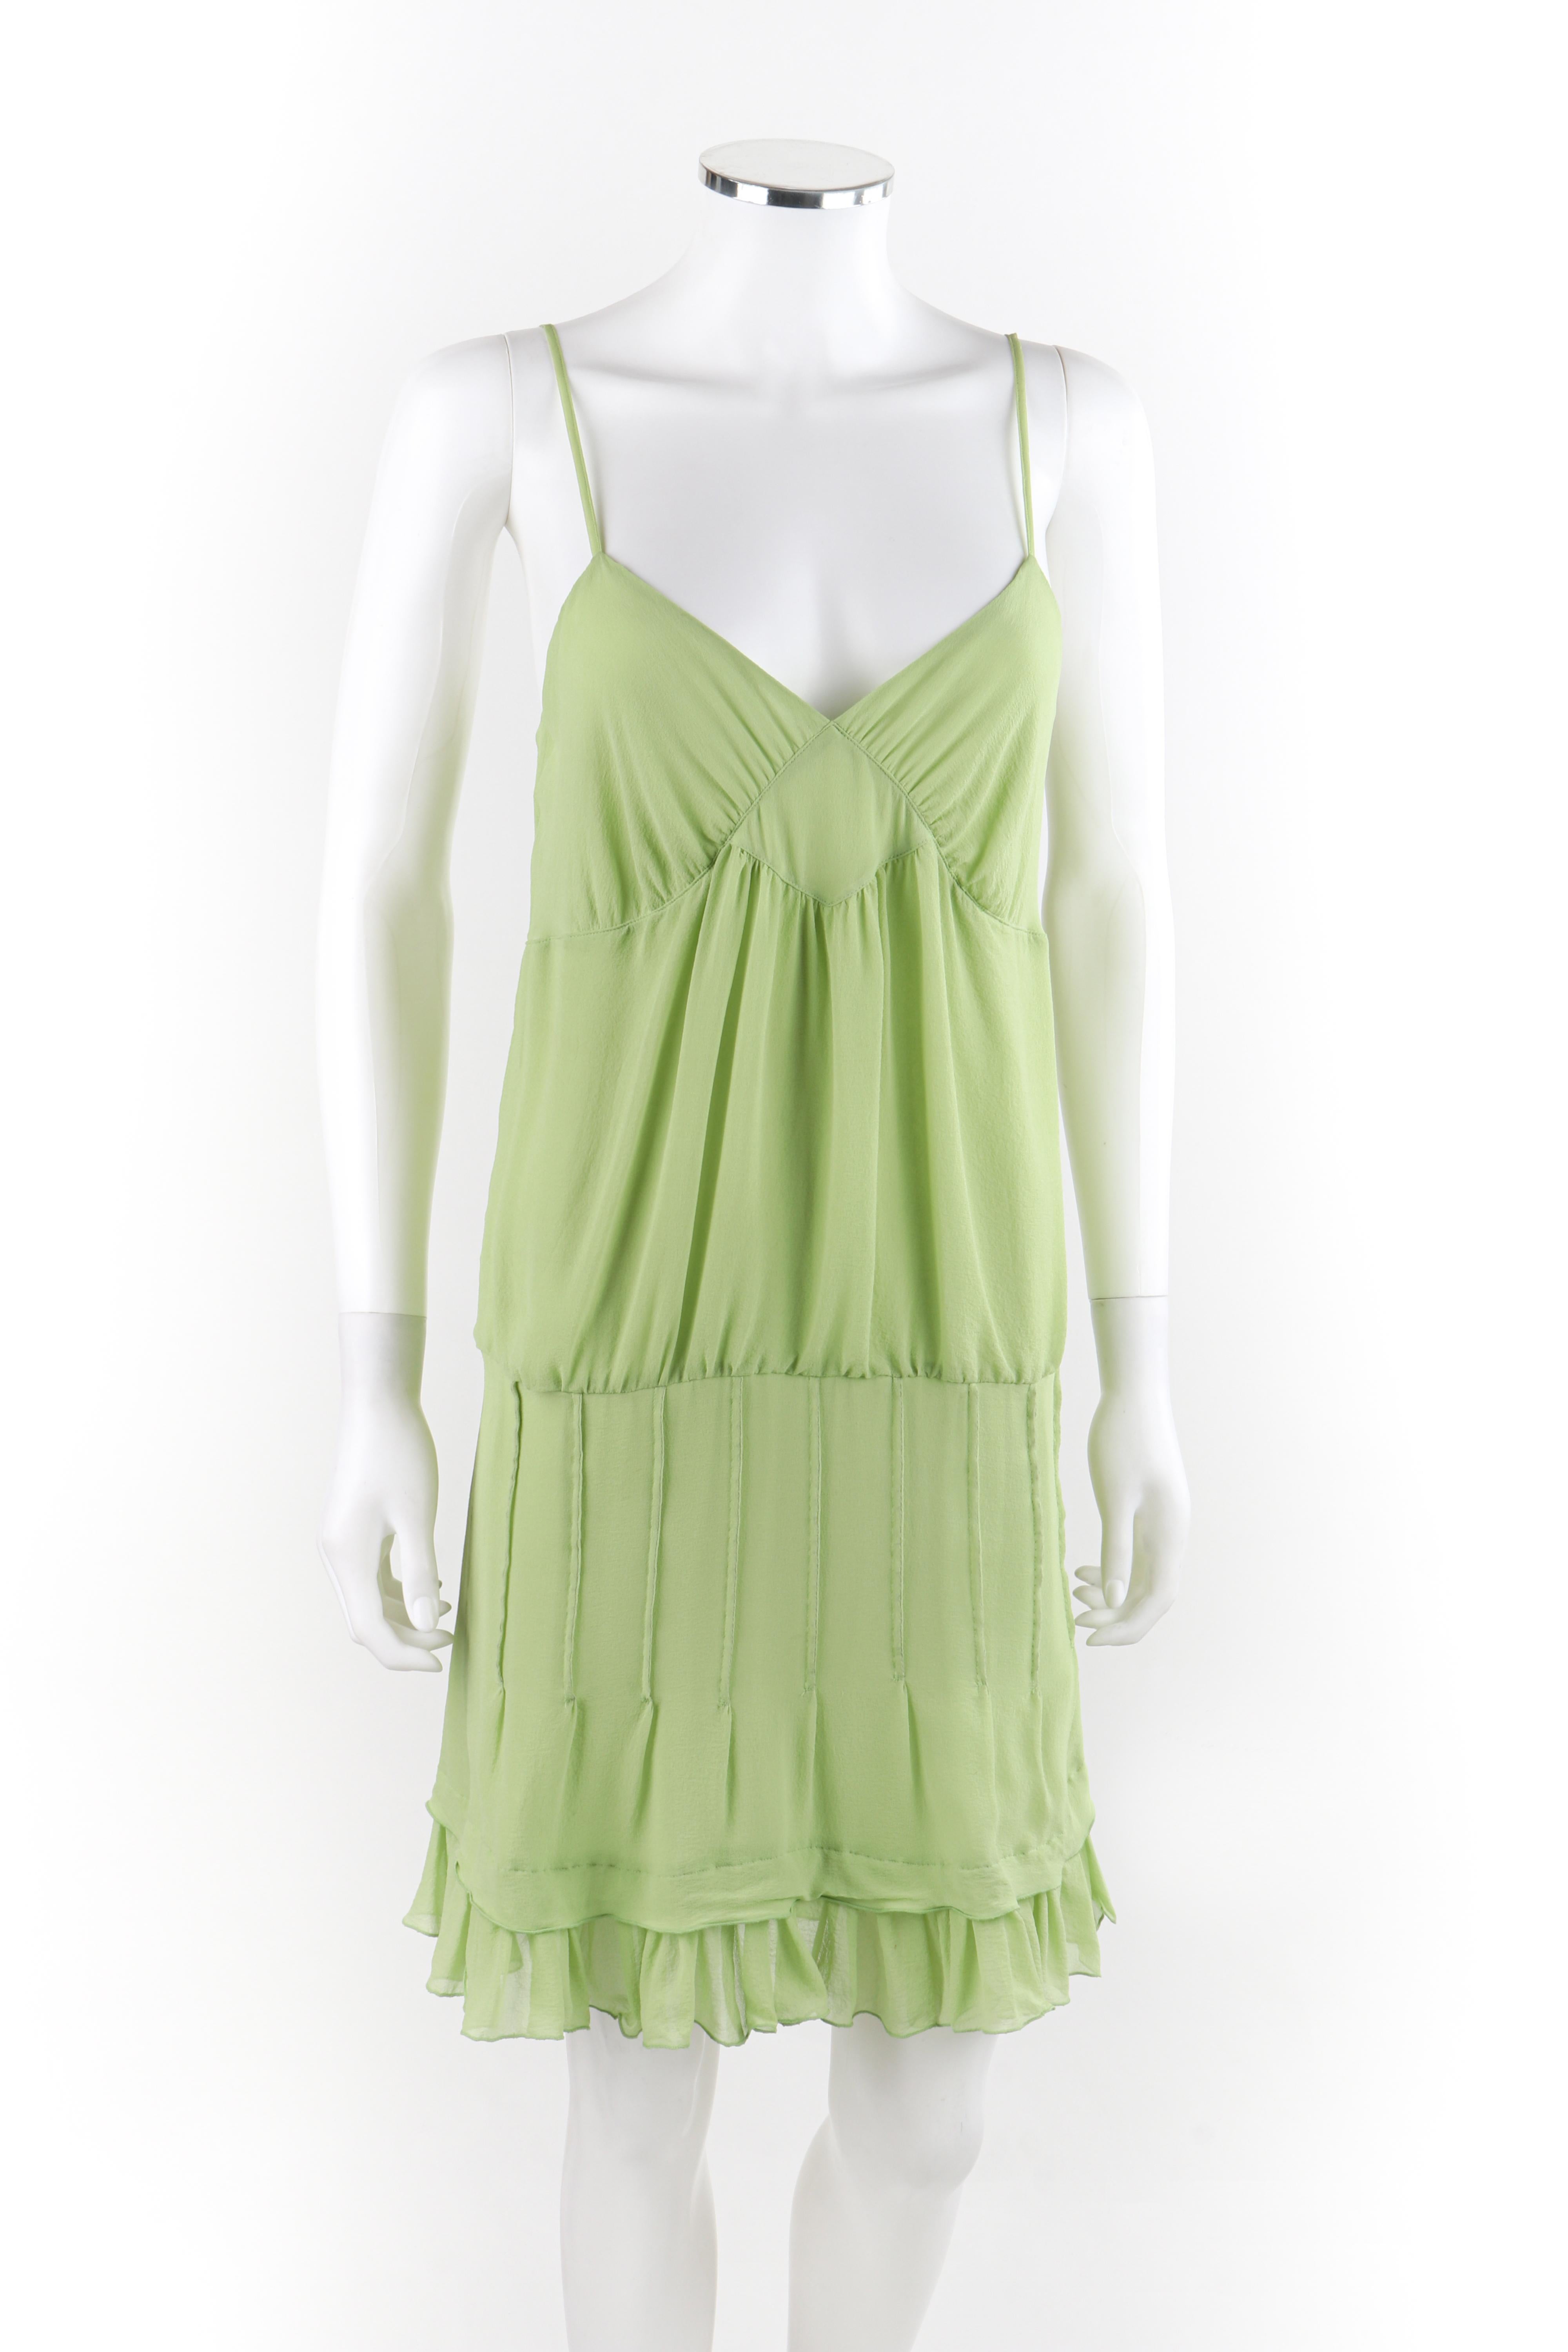 Women's ALEXANDER MCQUEEN S/S 1996 Chartreuse Ruffled Tiered V-neck Pleated Sundress  For Sale